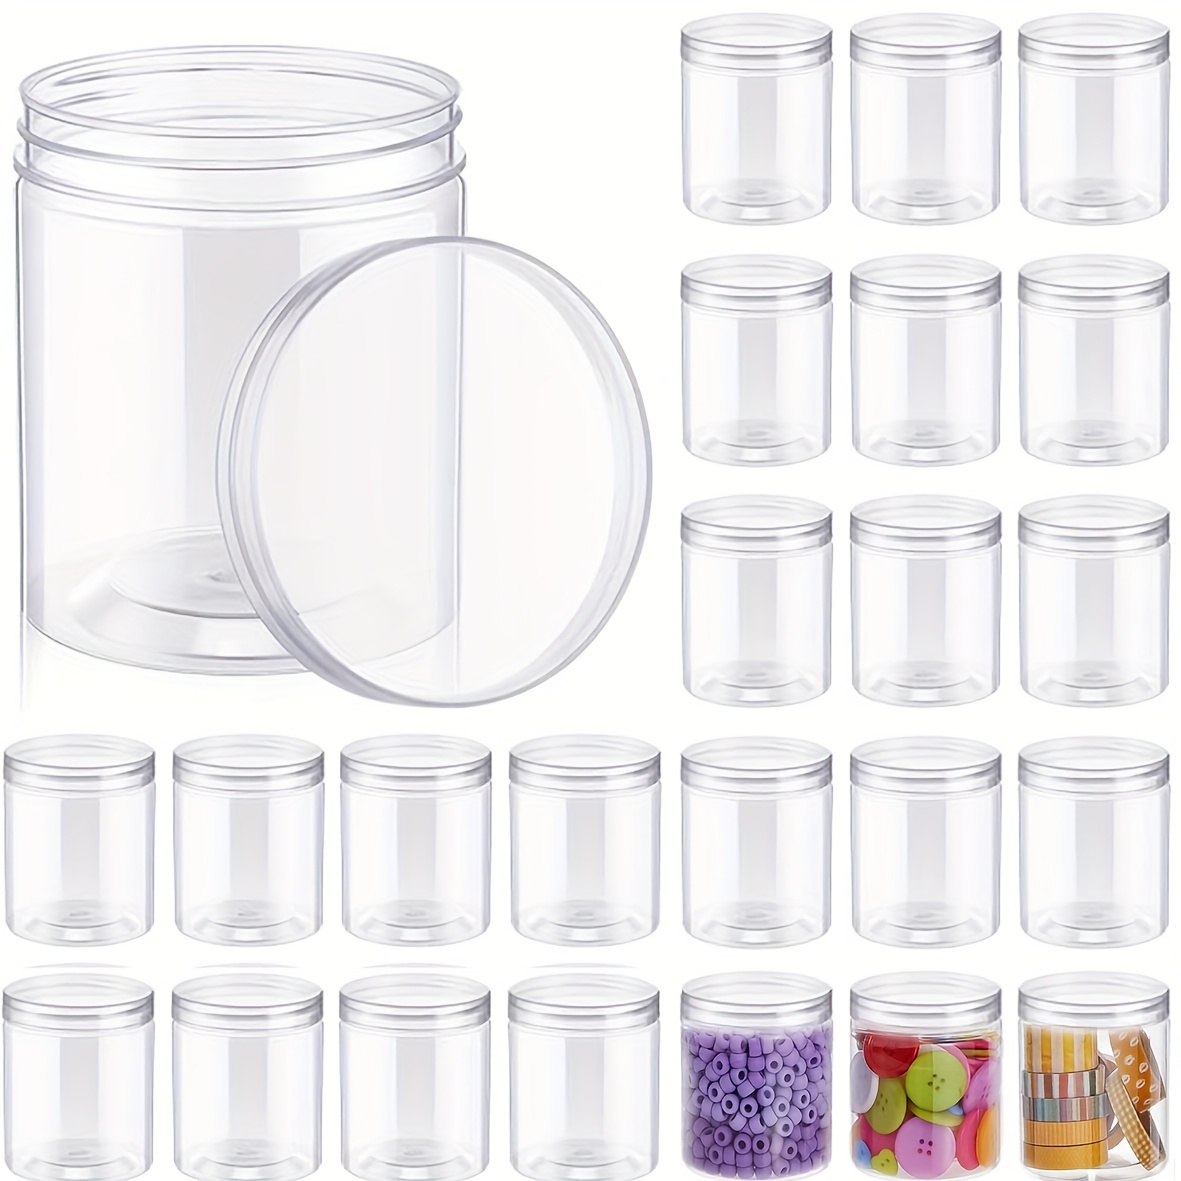 

12 Pack 250ml Clear Plastic Storage Jars With Lids - Multipurpose Containers For Diy Crafts, Beads, Small Parts Organization, Portable Toy Storage Box - White